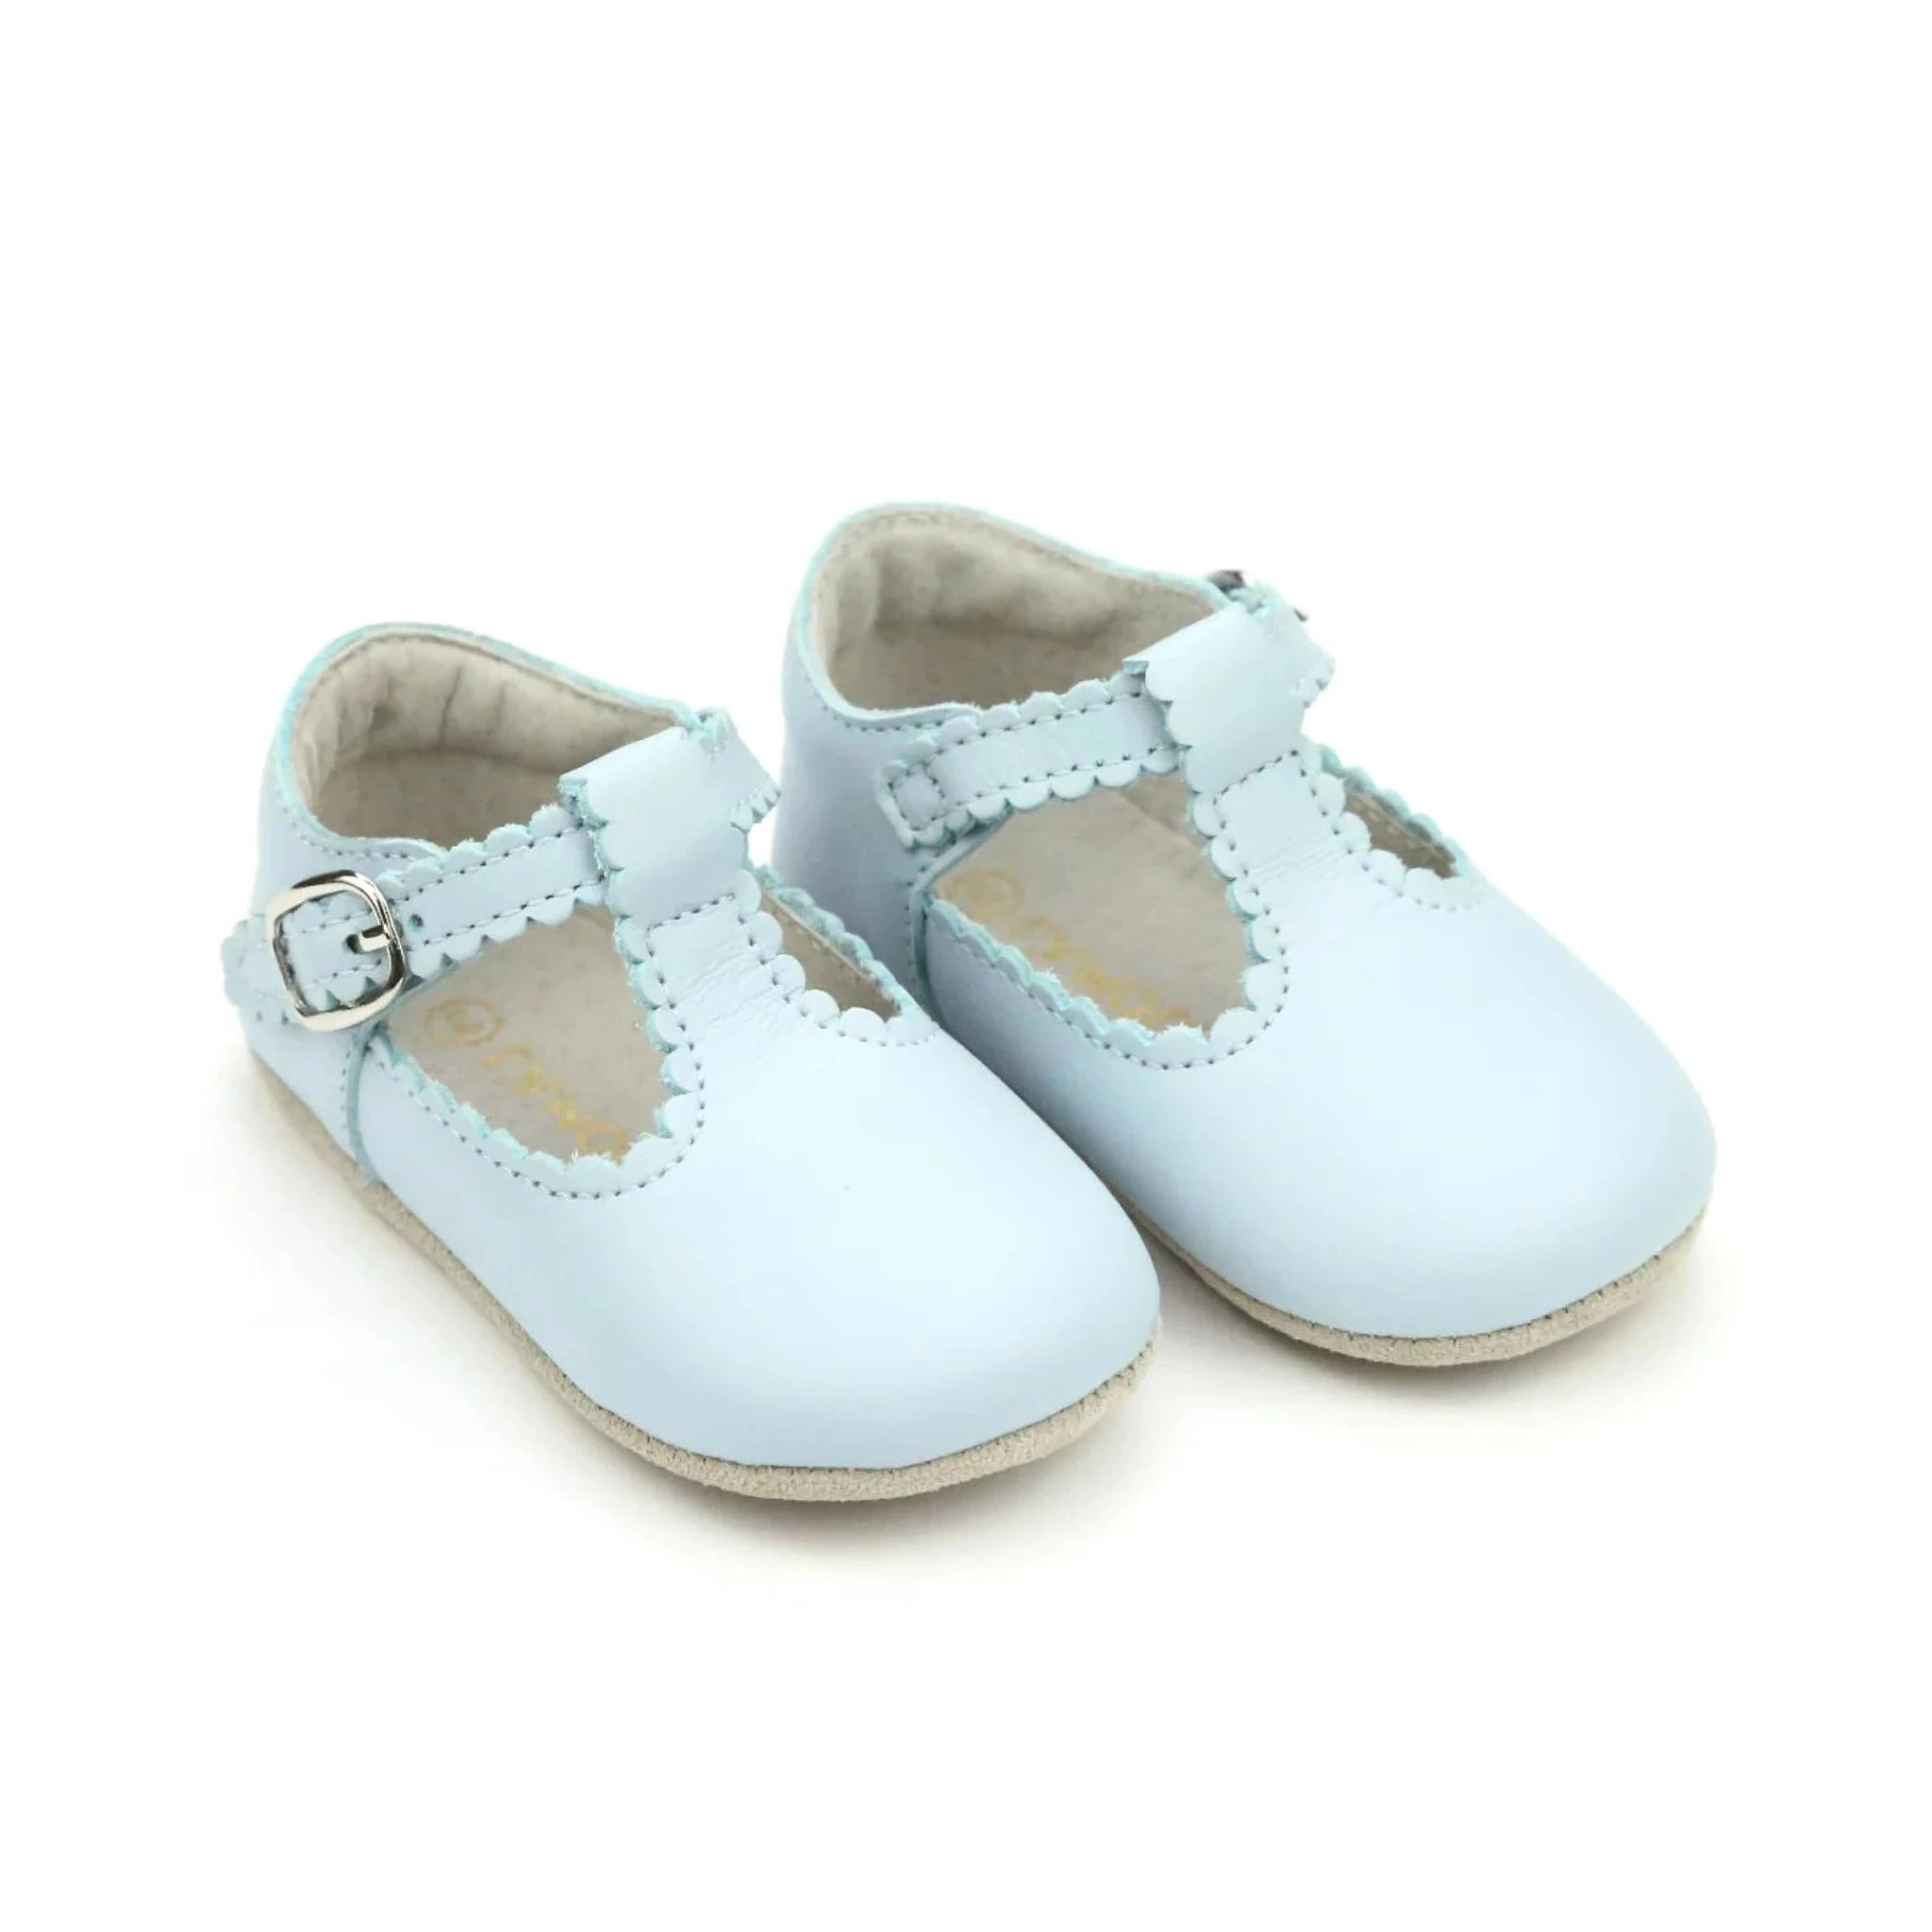 Elodie Scalloped T-Strap Mary Jane Crib Shoe